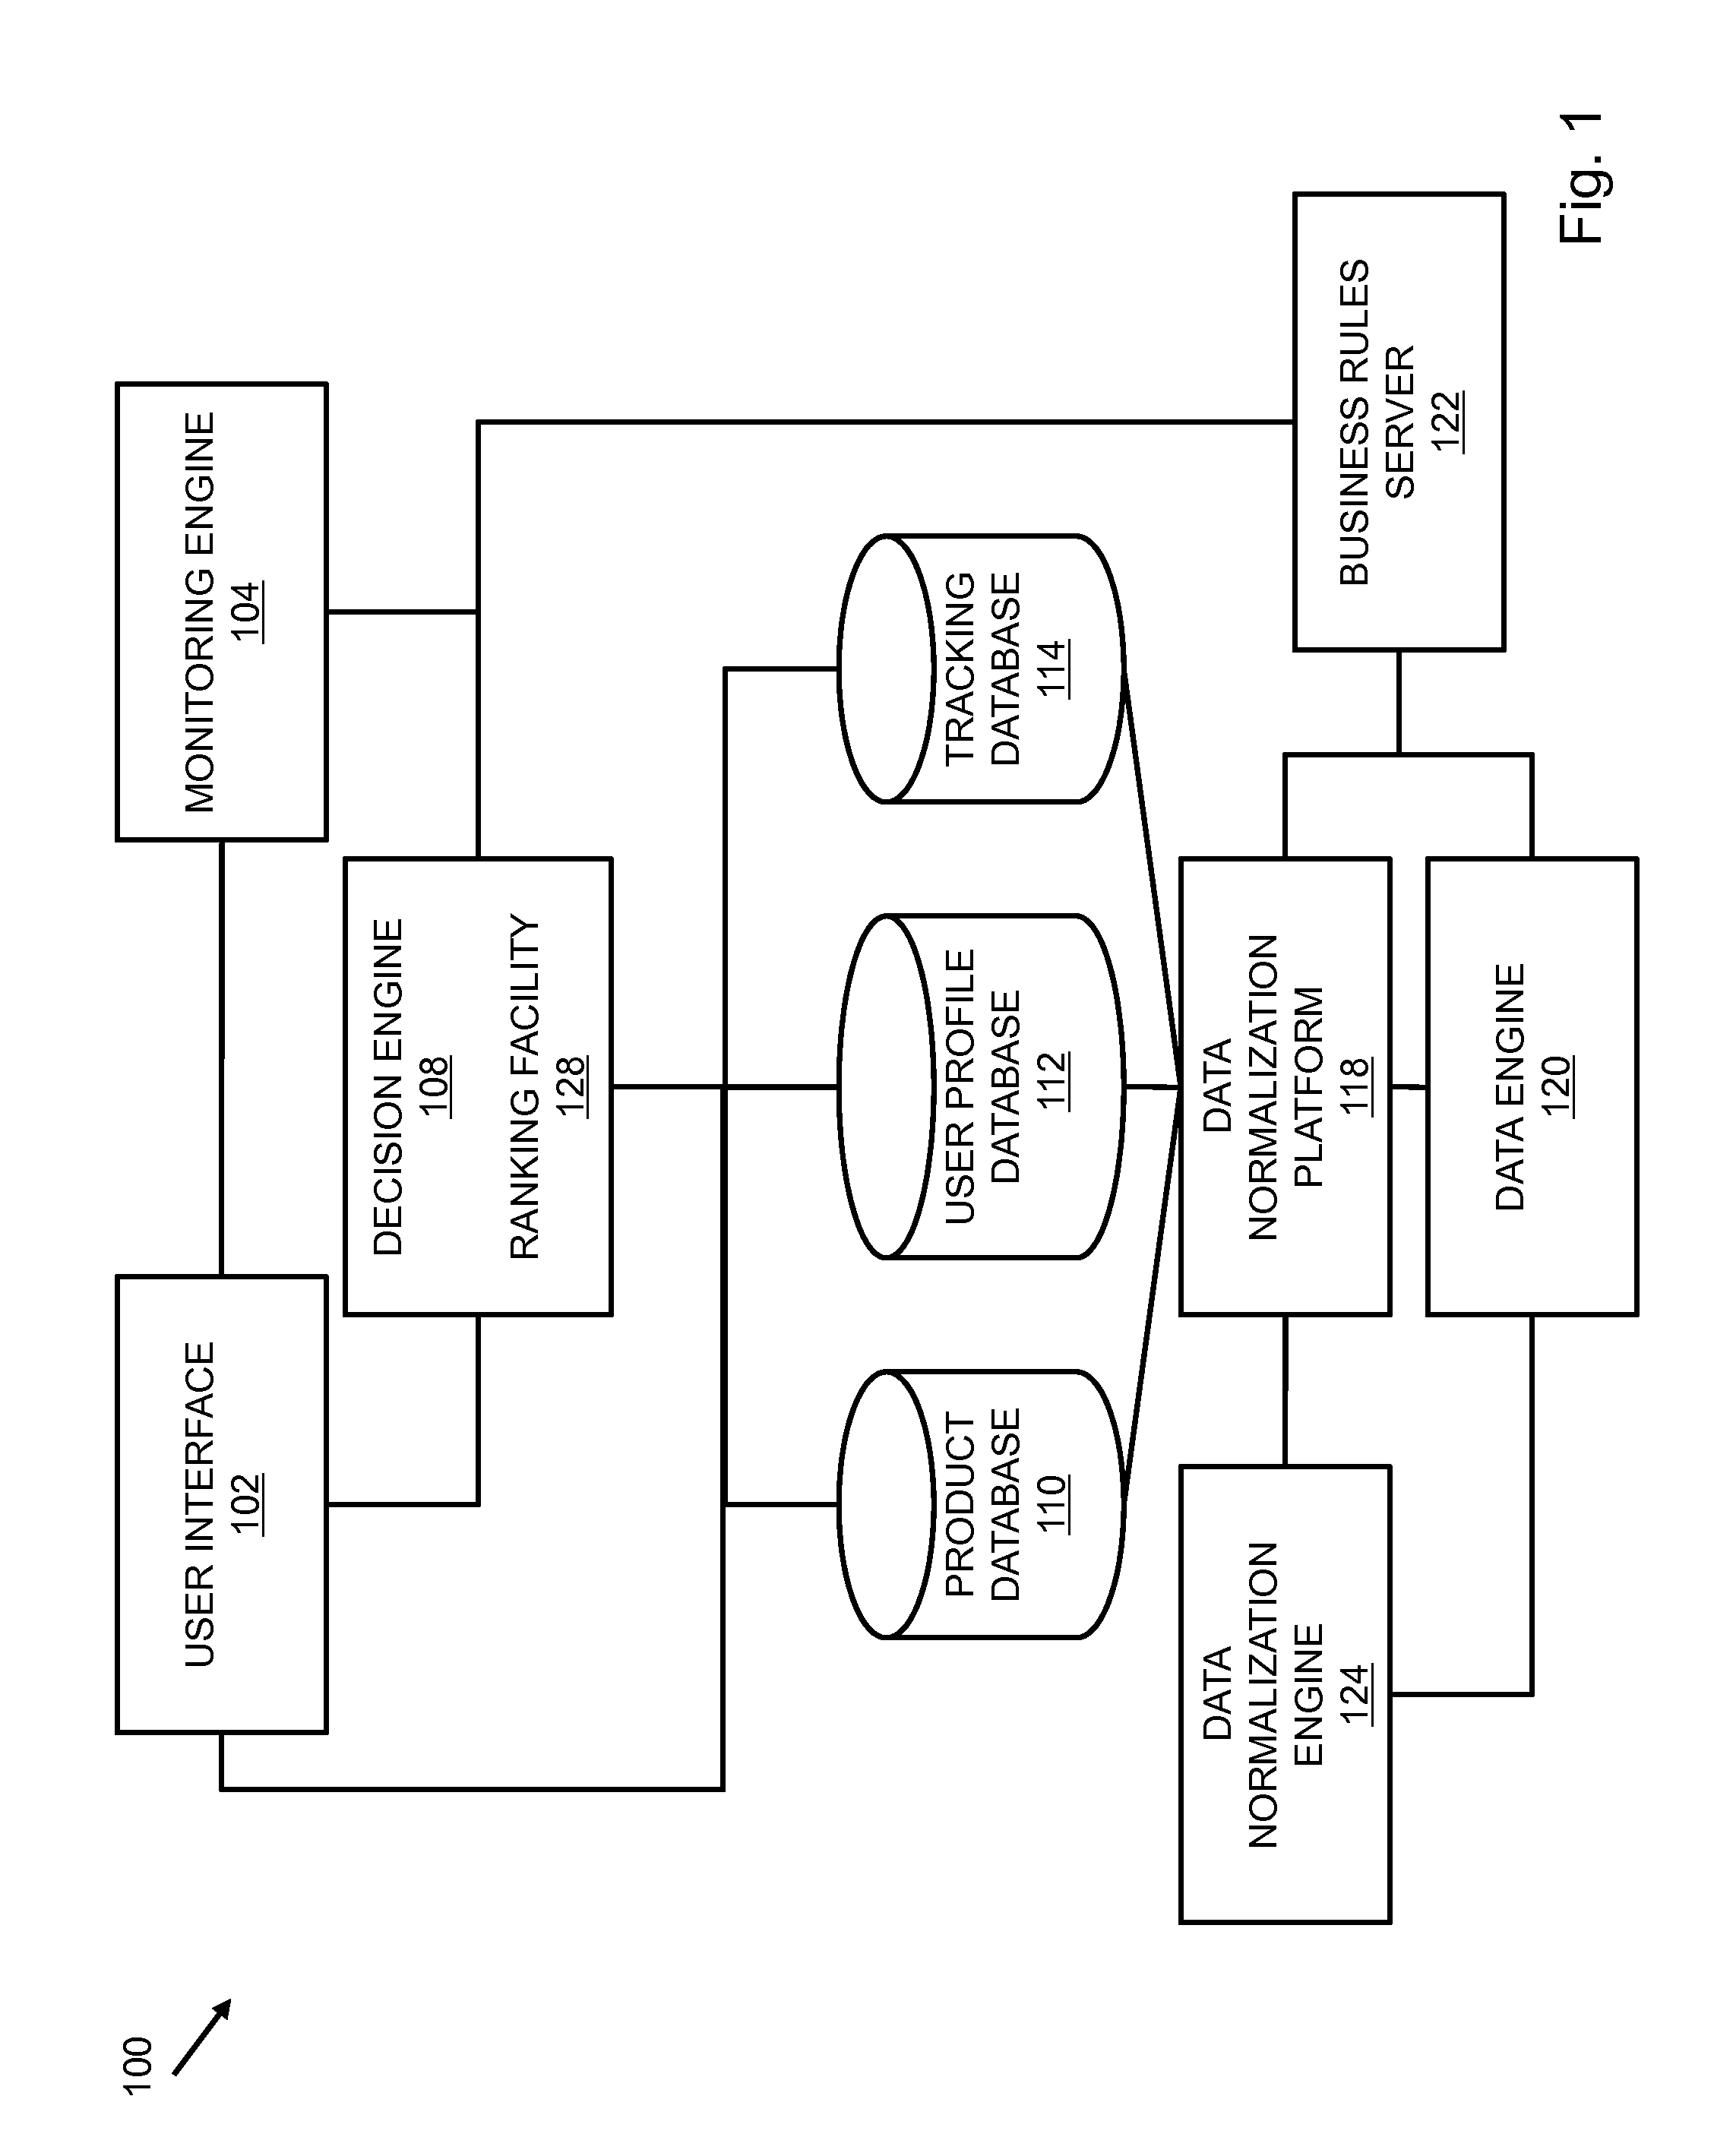 Method and system for inferring an individual cardholder's demographic data from shopping behavior and external survey data using a bayesian network